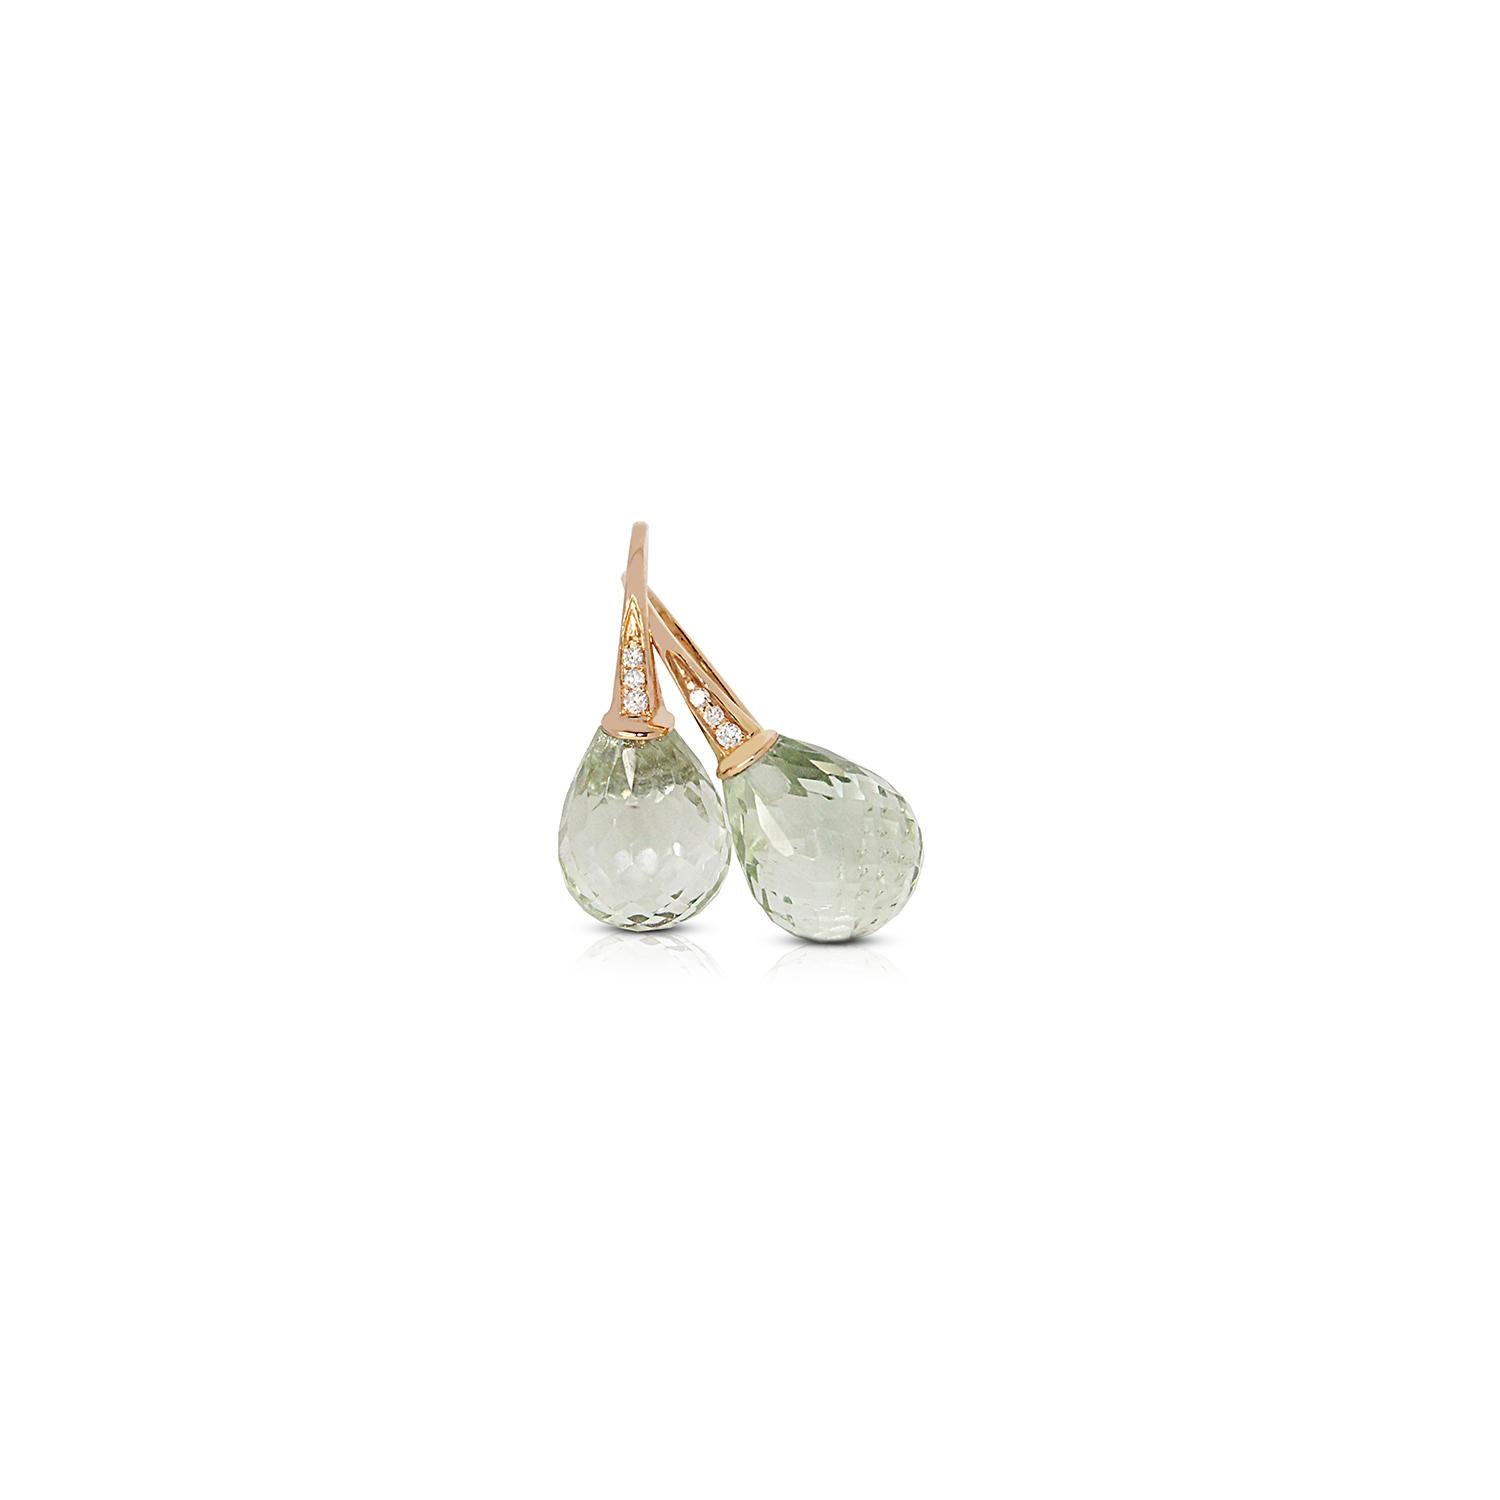 Elegant earrings in 18kt pink gold, white diamonds and facetted green amethyst tear drops.  
Hook system. 
Green amethyst ct. 25.4
White diamonds ct. 0.10
Pink Gold g. 2


